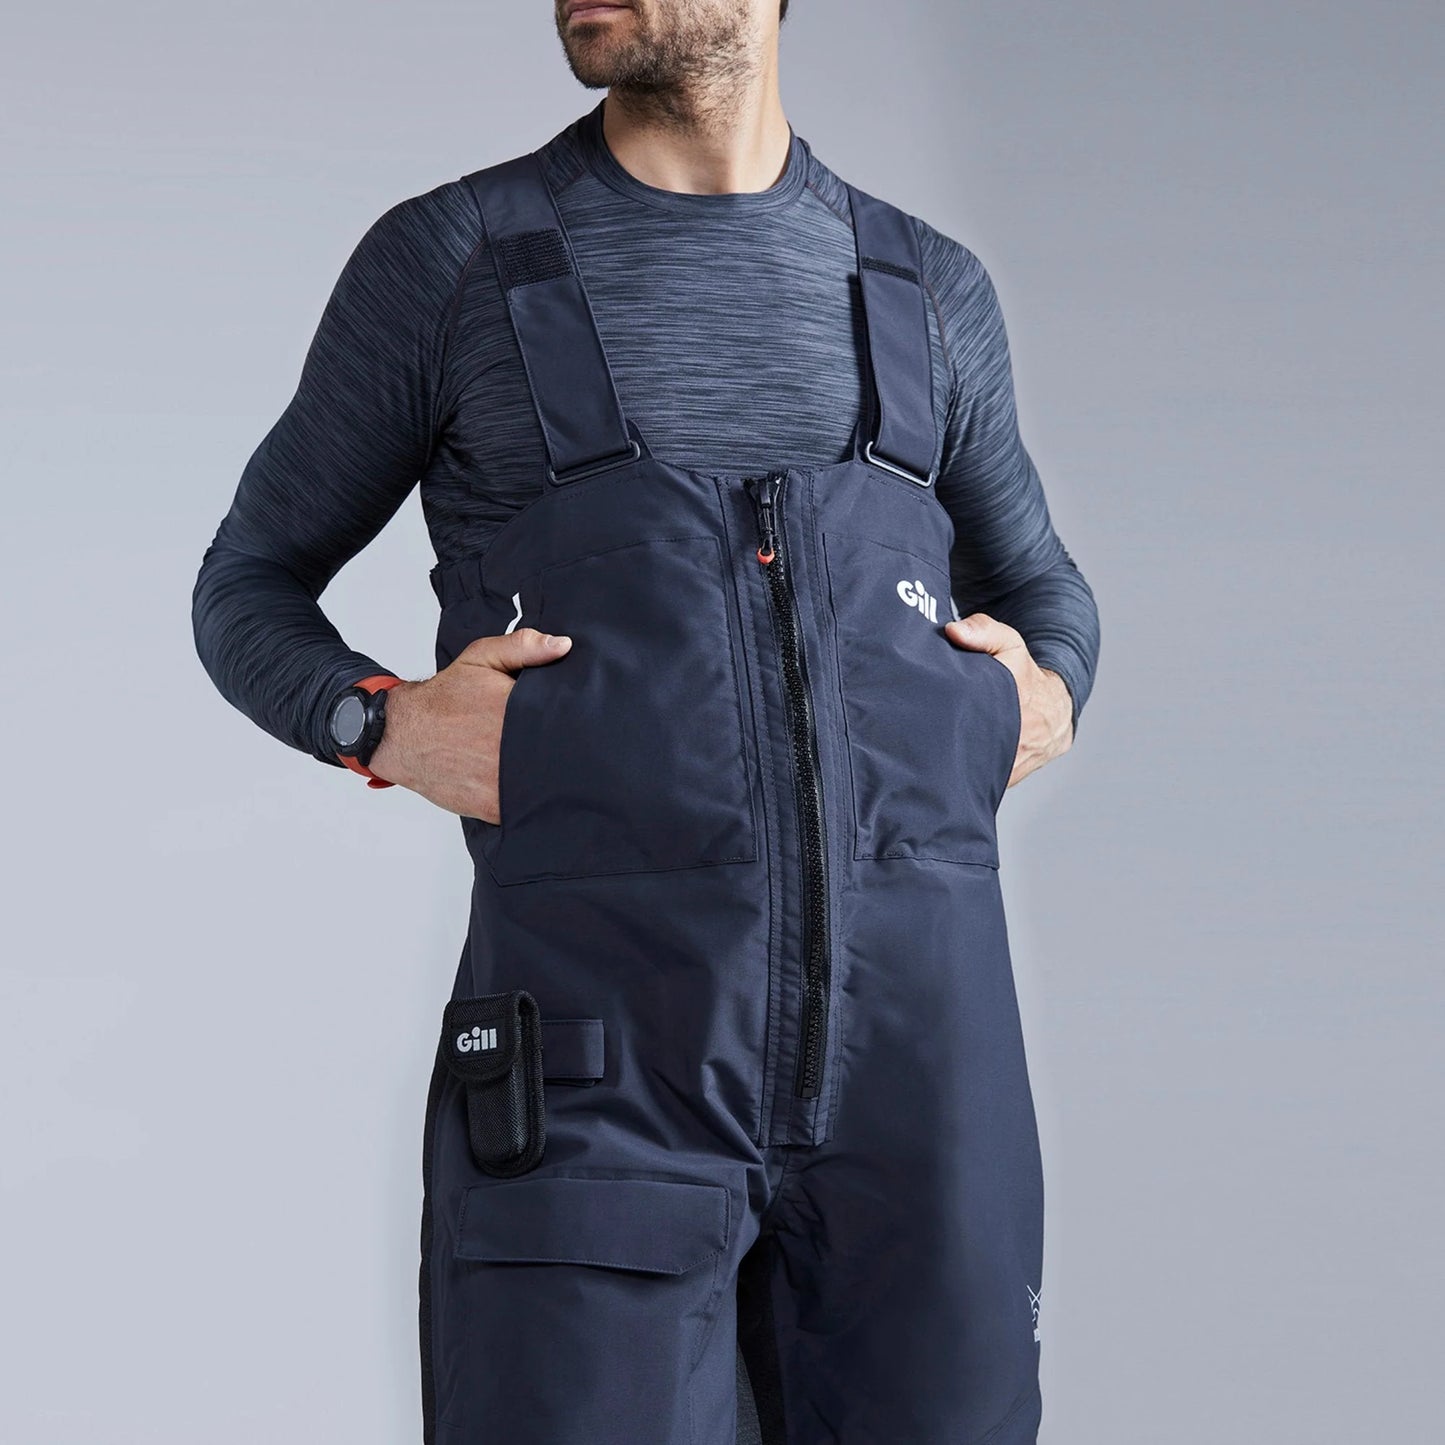 Offshore Trousers - OS25T